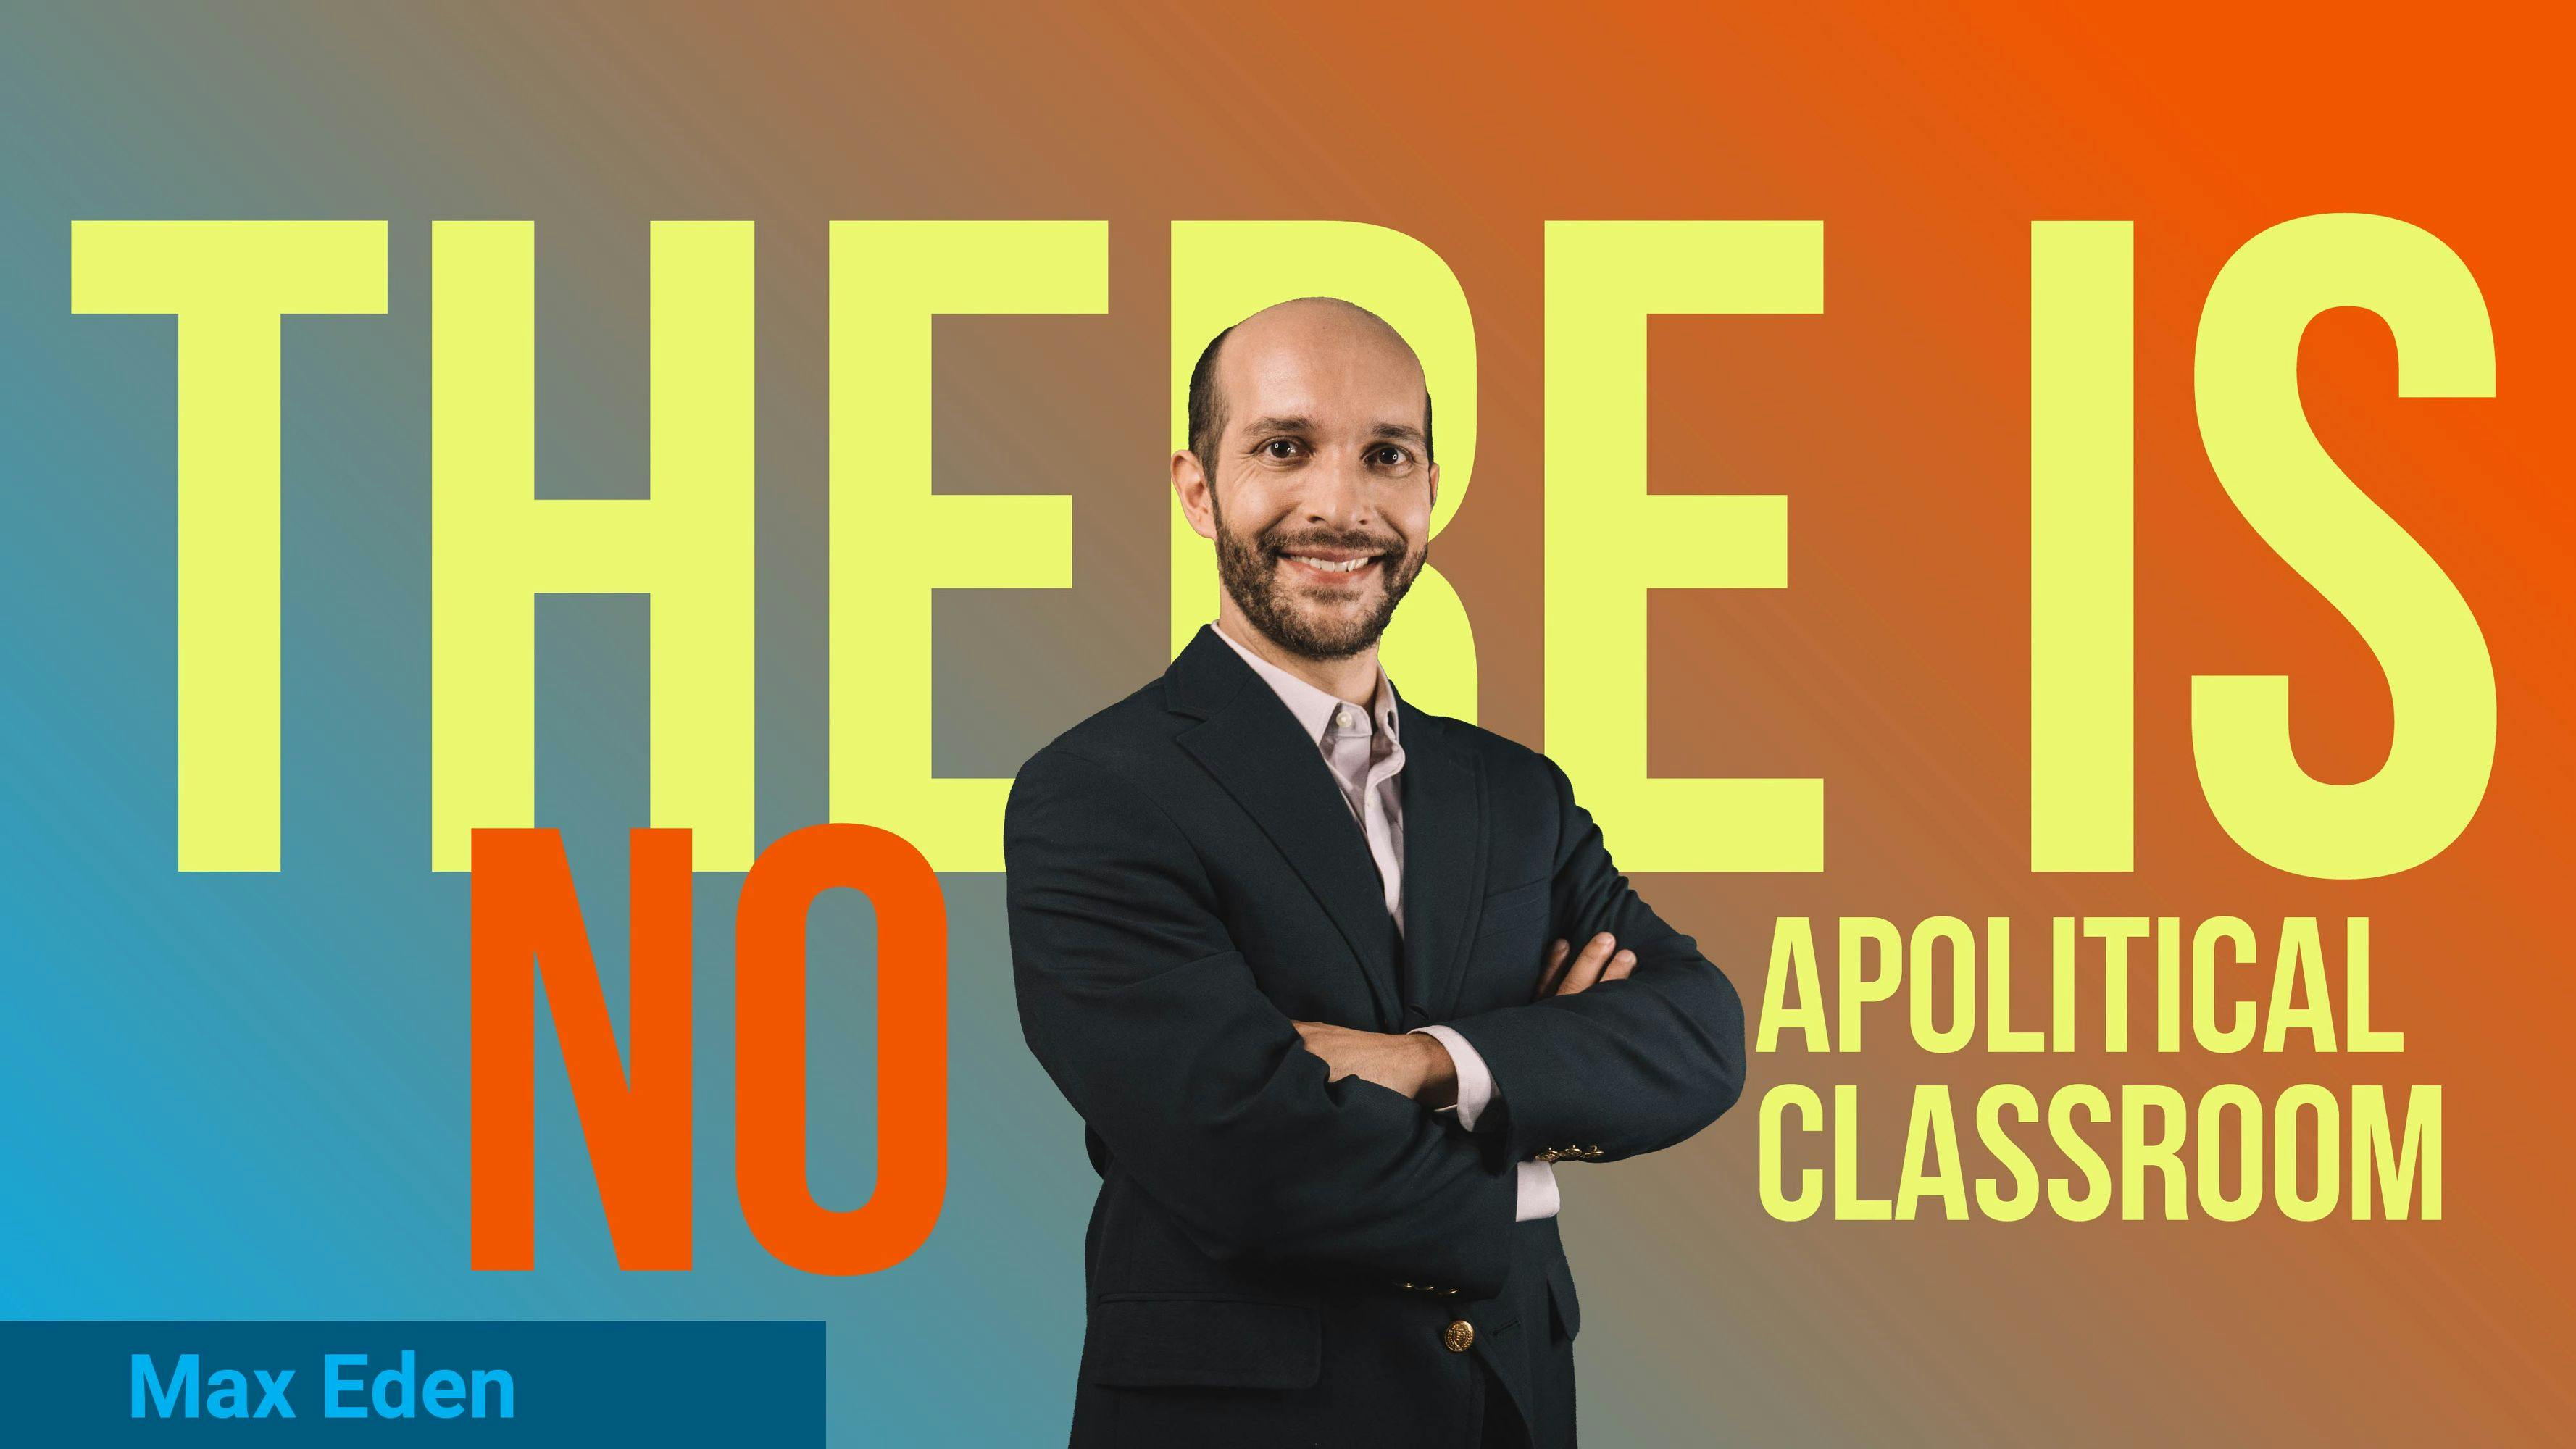 There Is No Apolitical Classroom